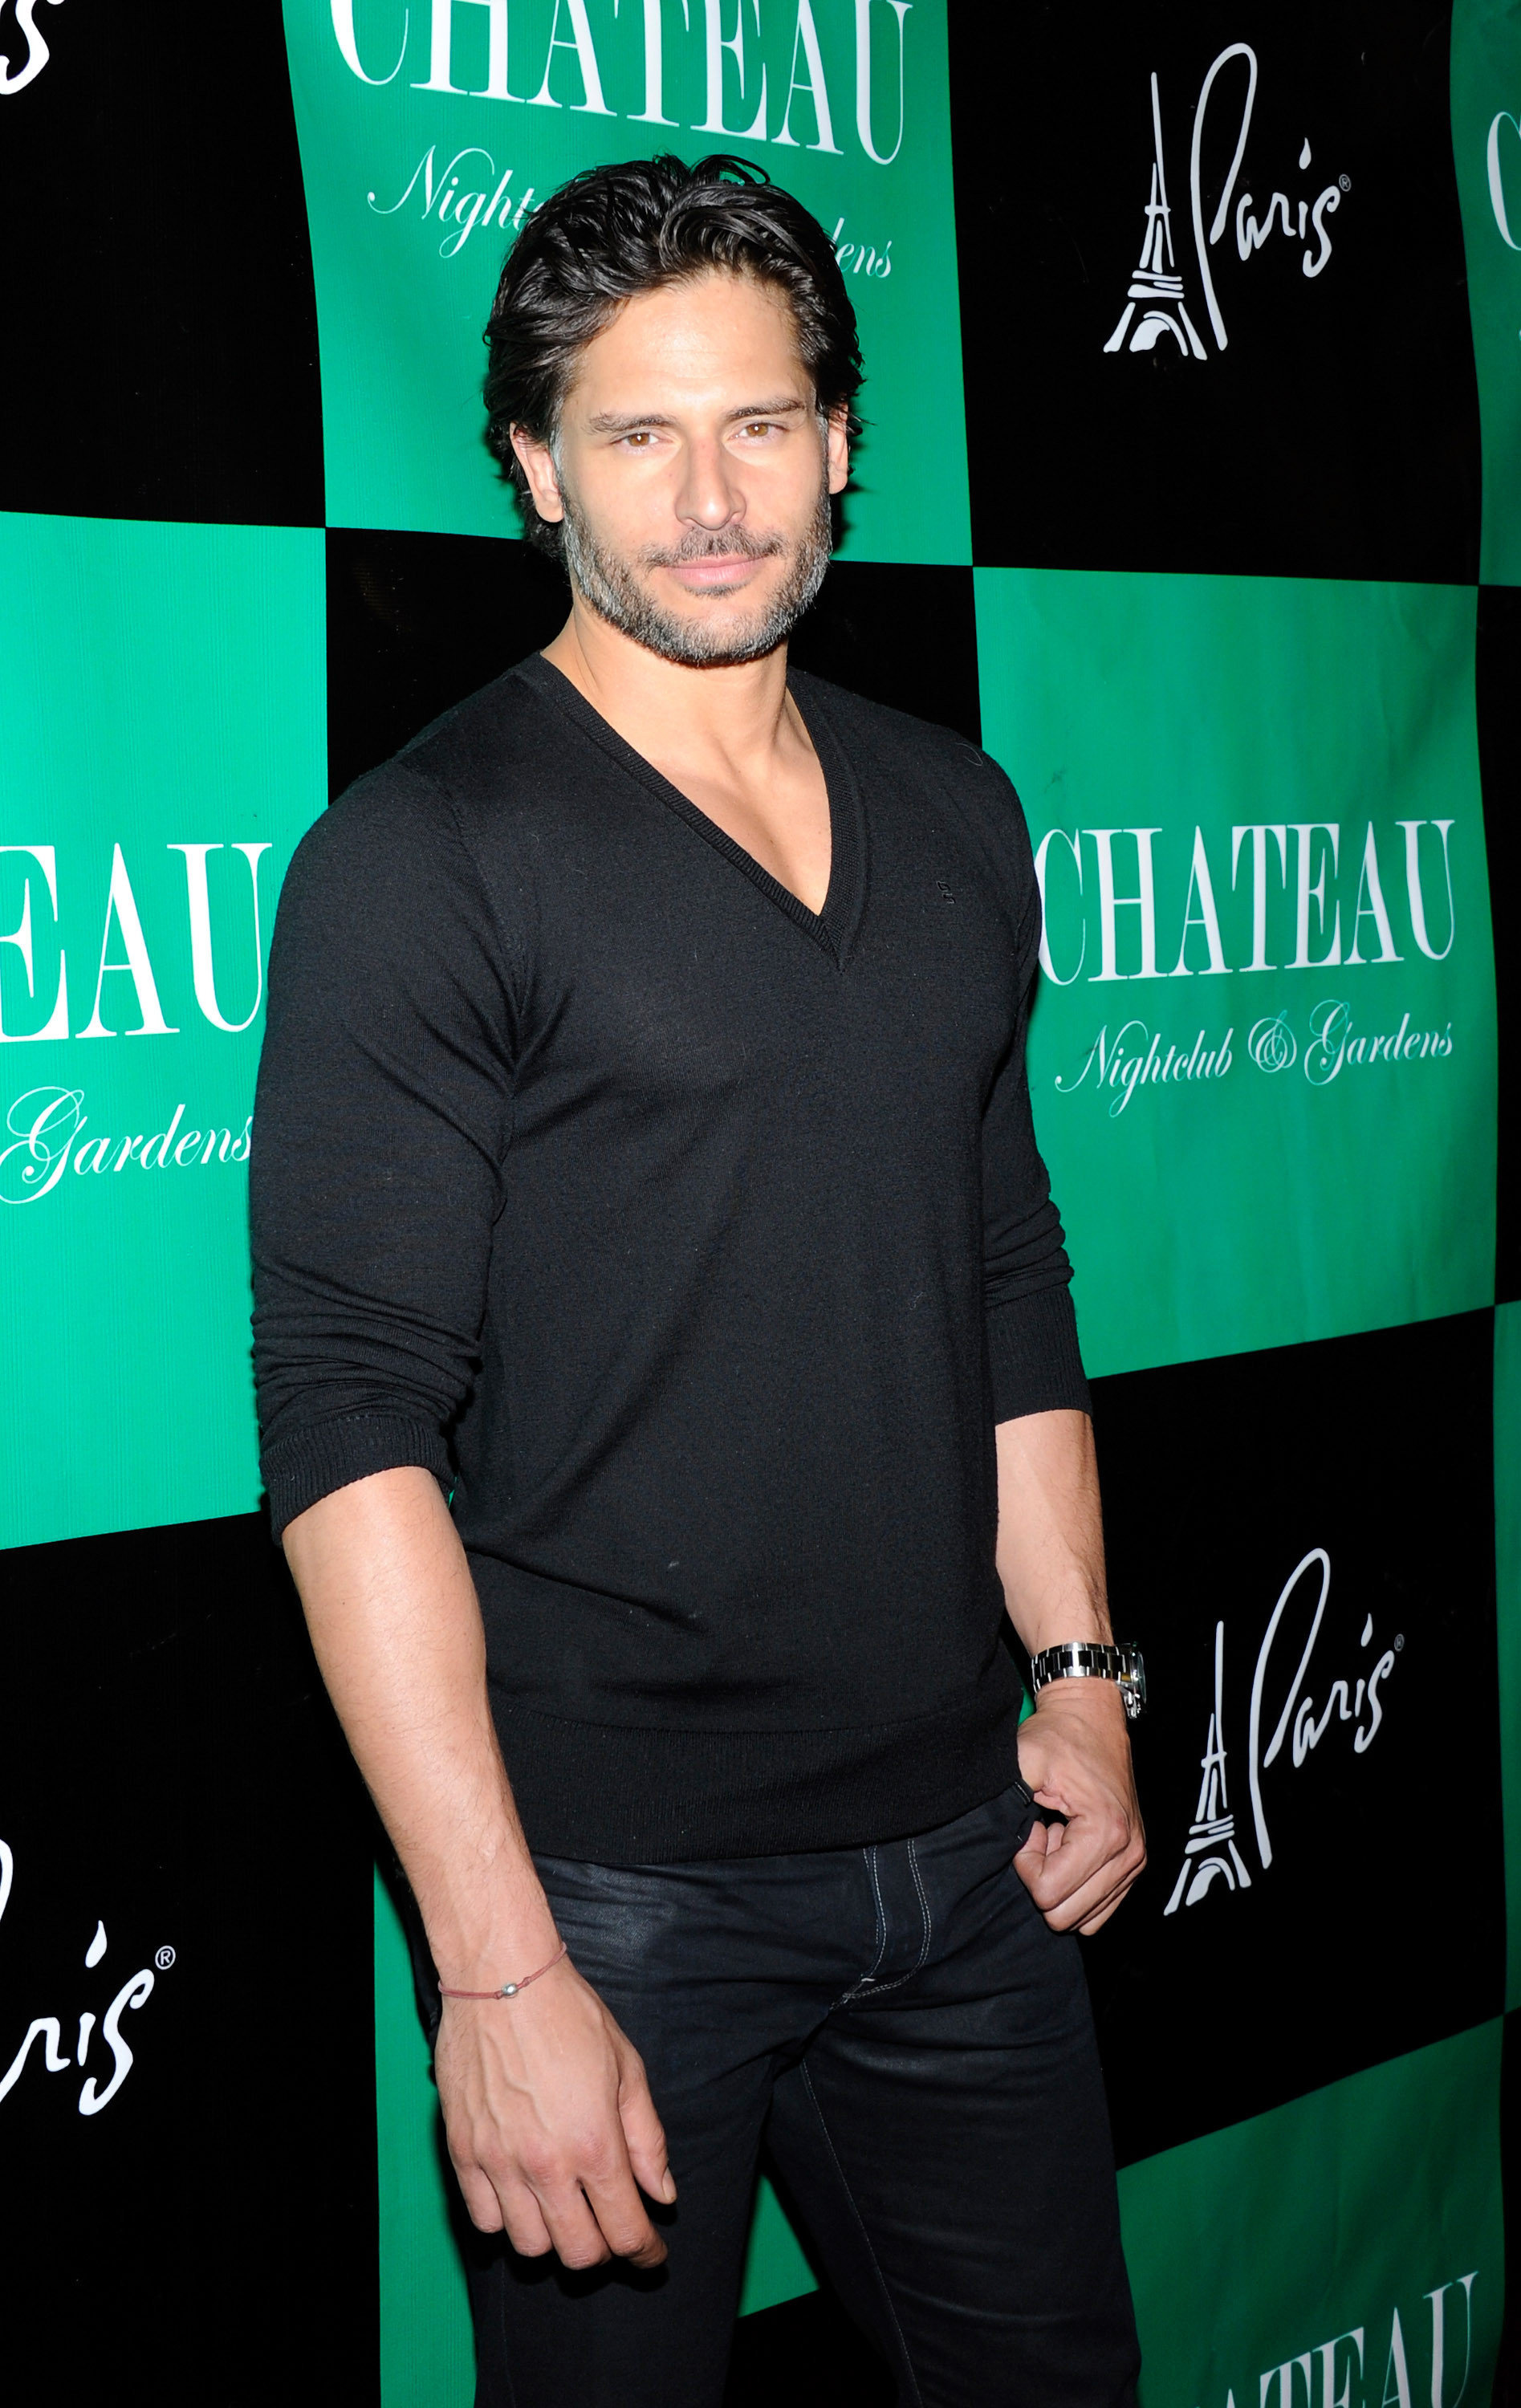 Joe Manganiello Interview Actor Talks True Blood Finale, Male Strippers and Magic Mike HuffPost Entertainment